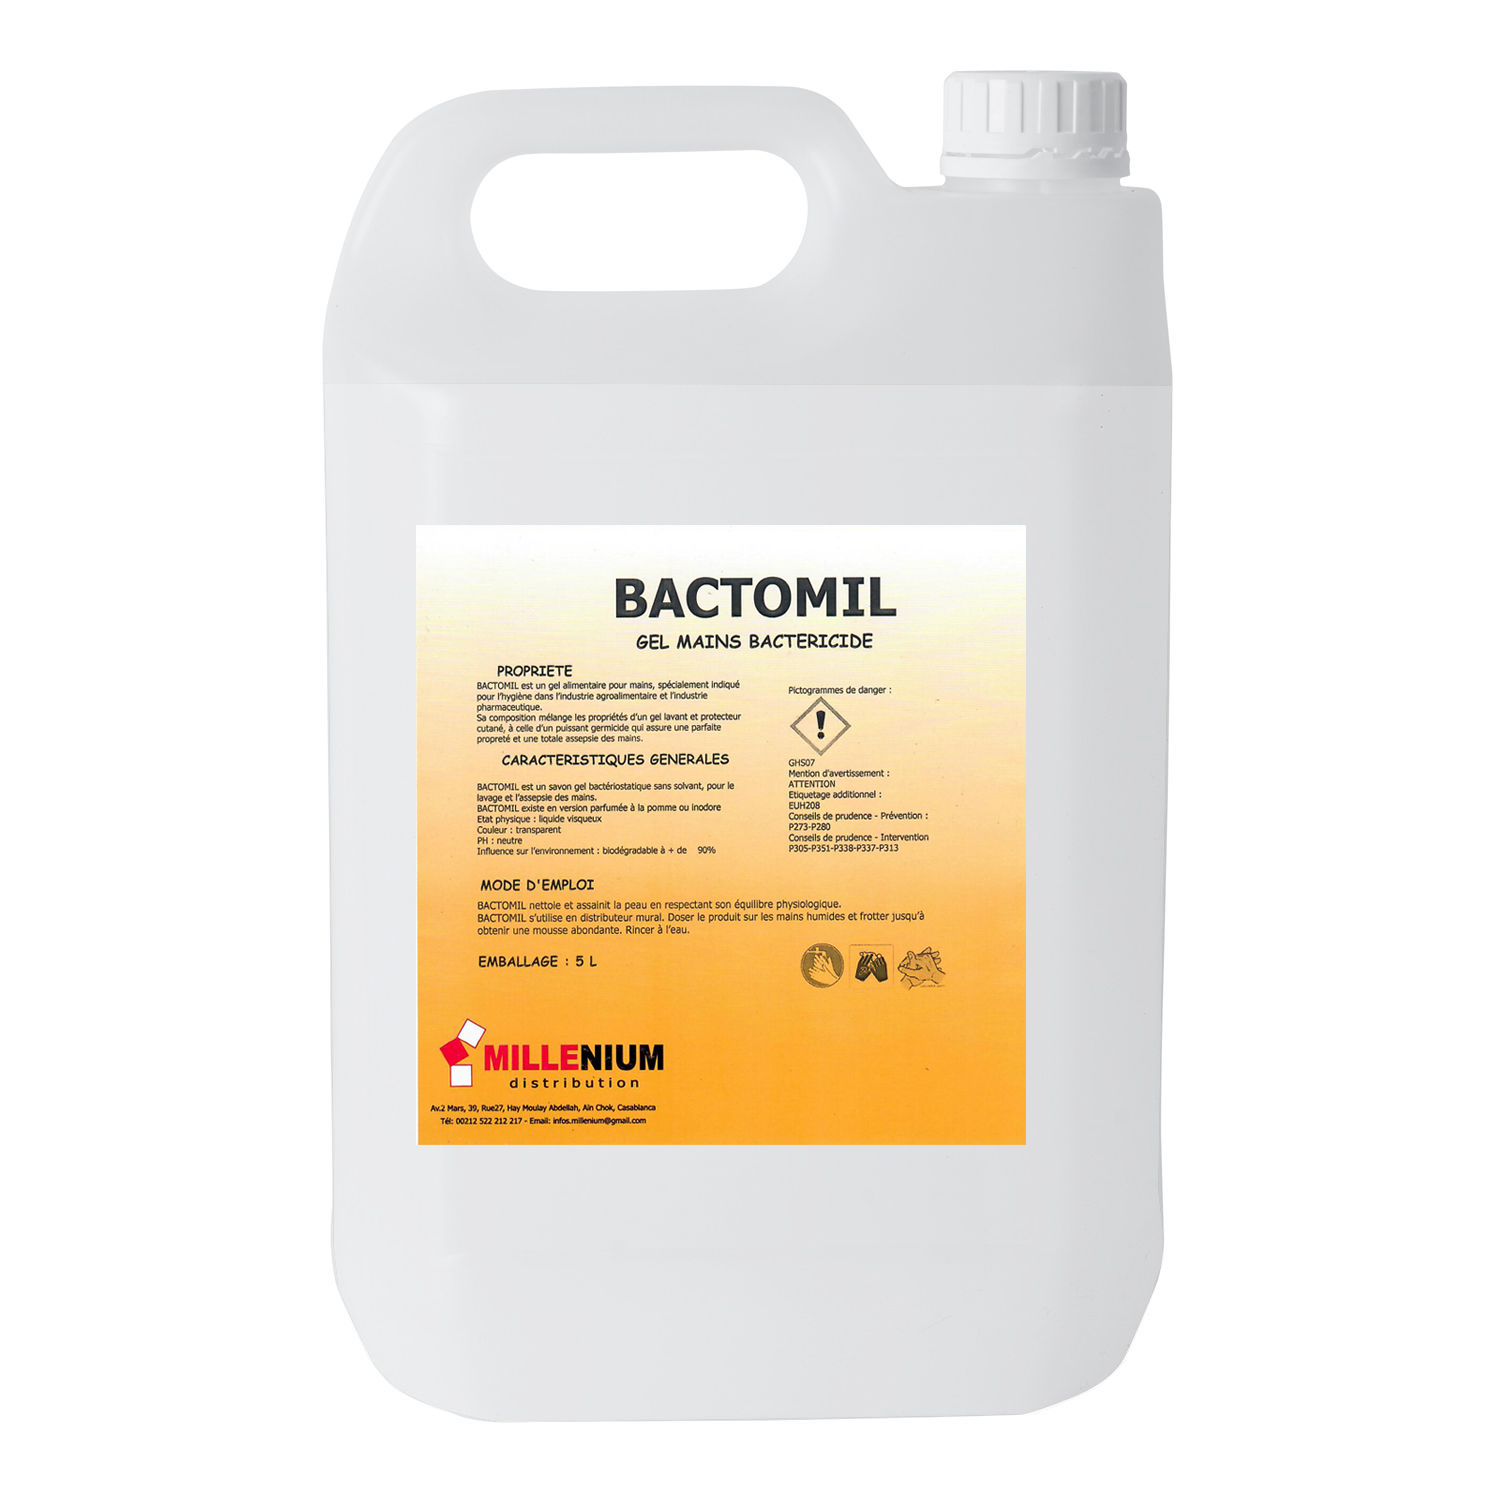 BACTOMIL